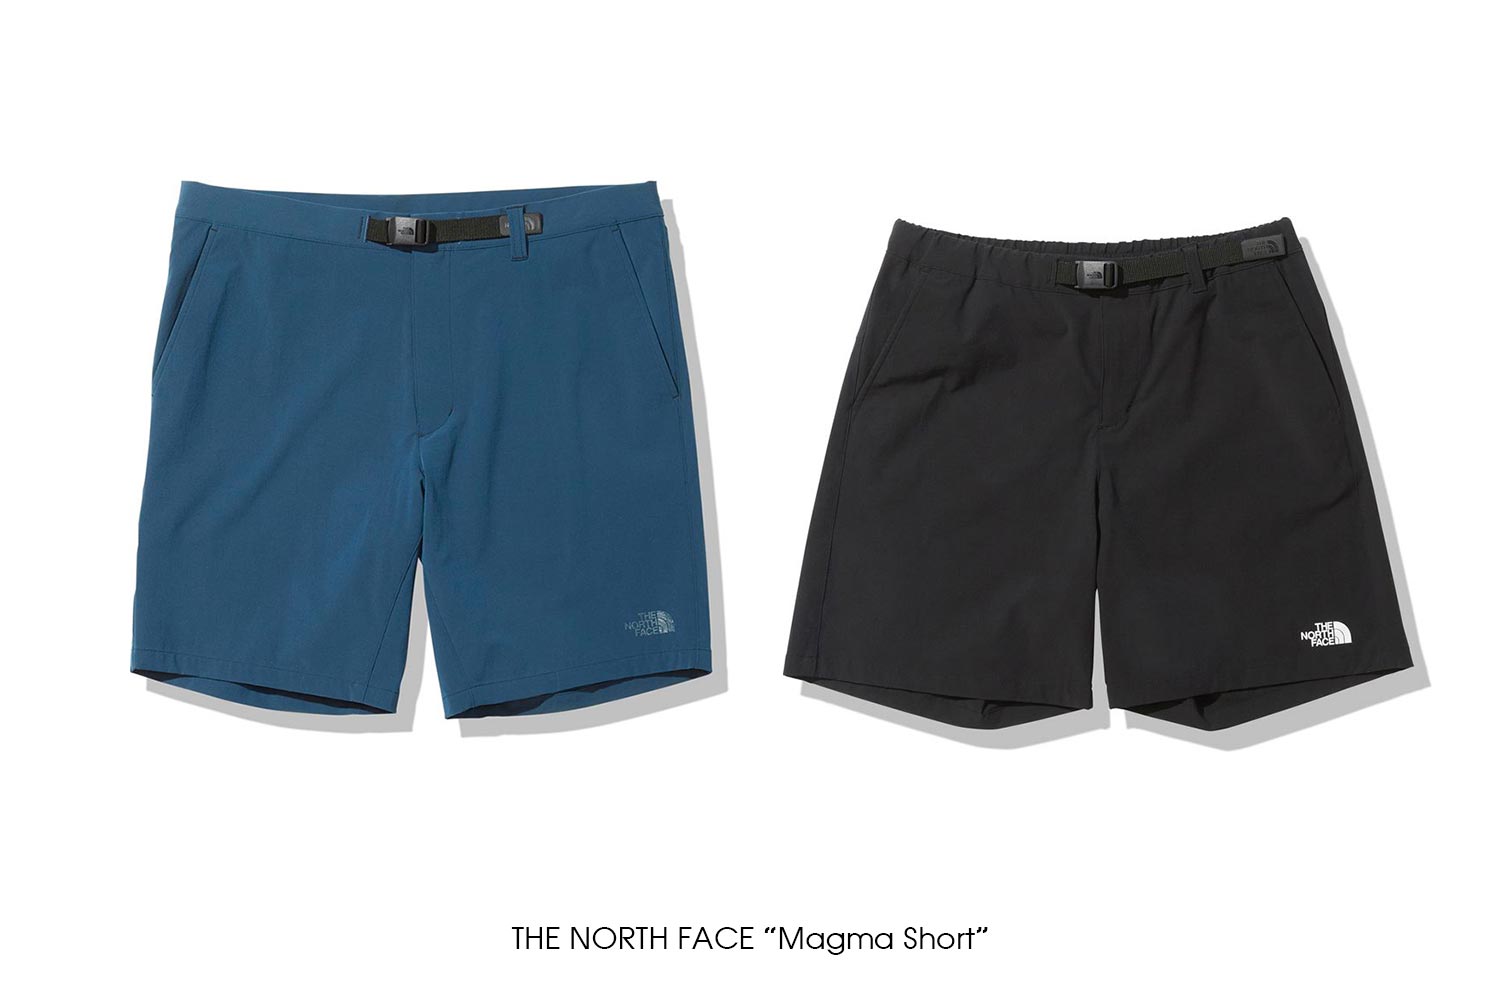 THE NORTH FACE "Magma Short"